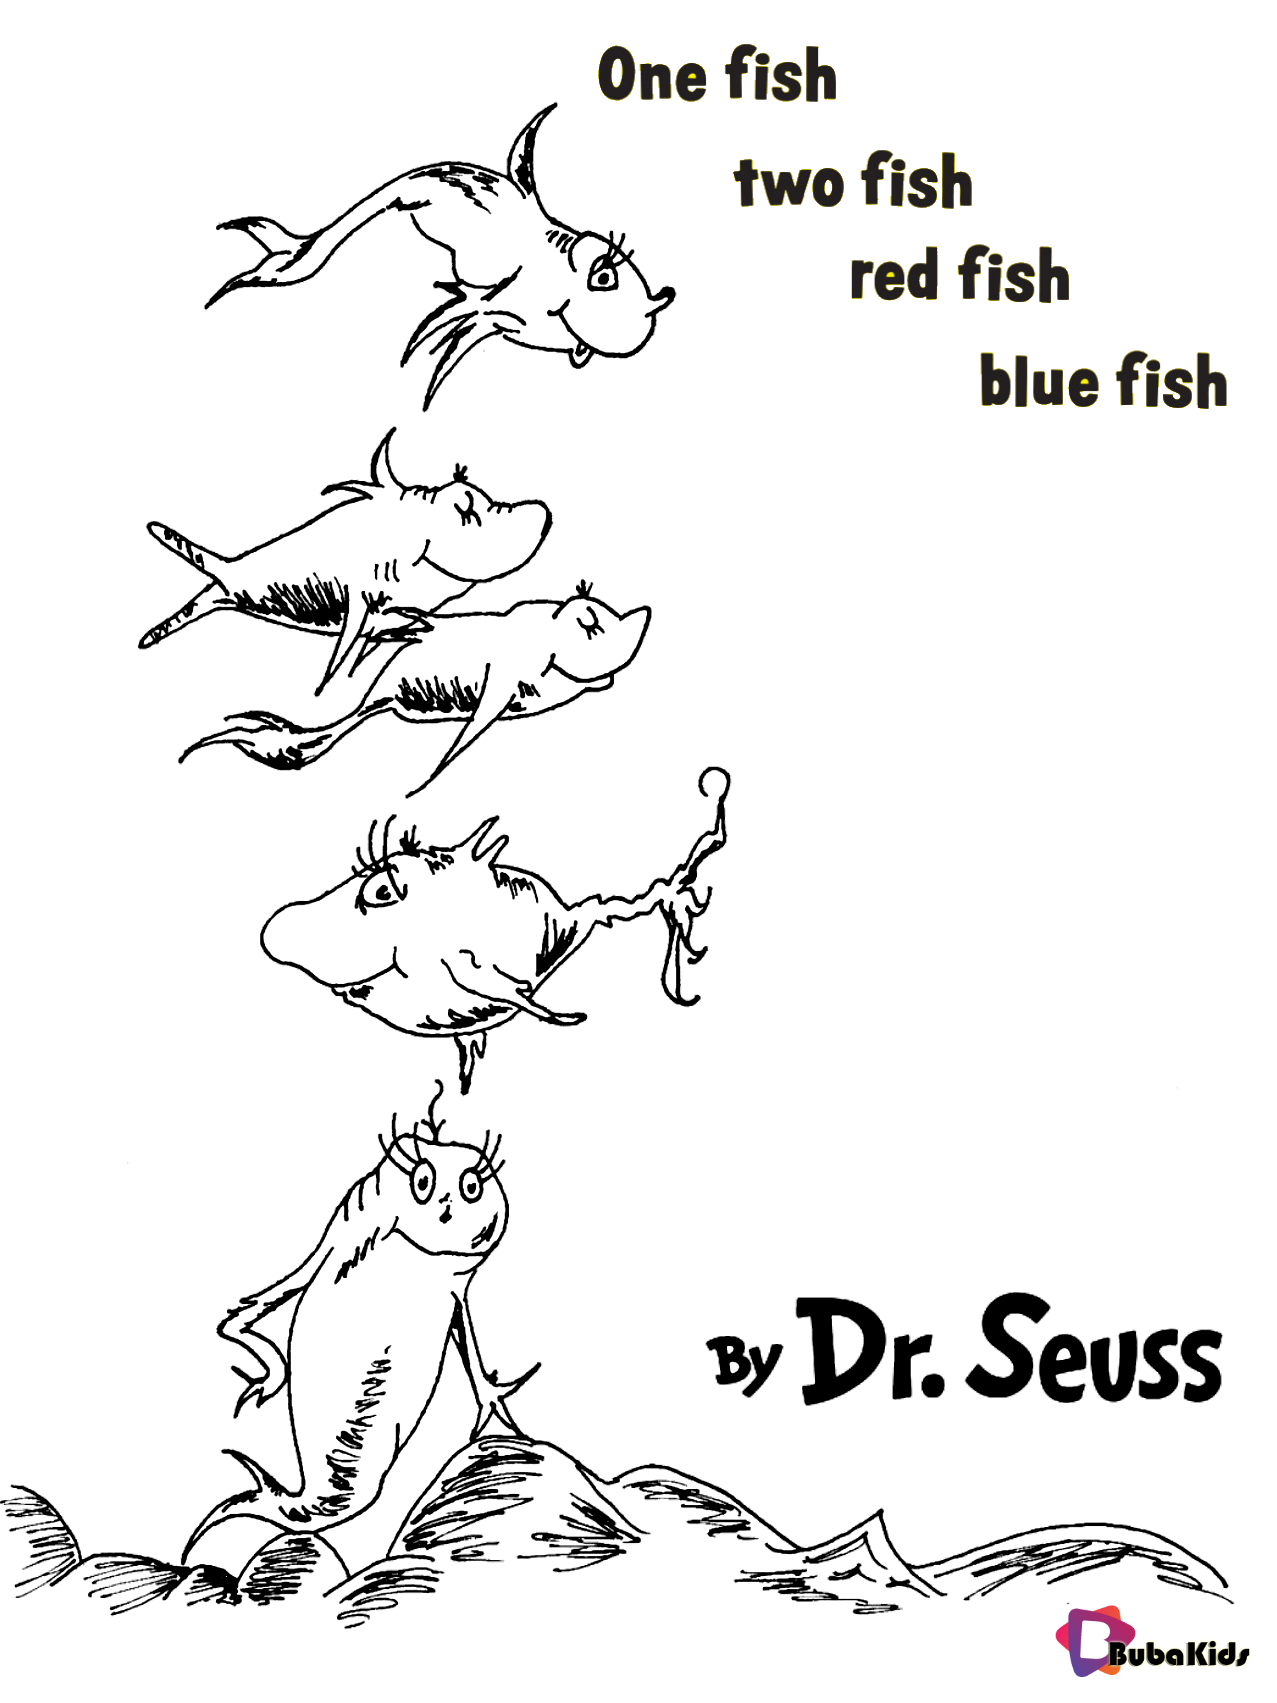 Dr seuss One fish two fish red fish blue fish free ...